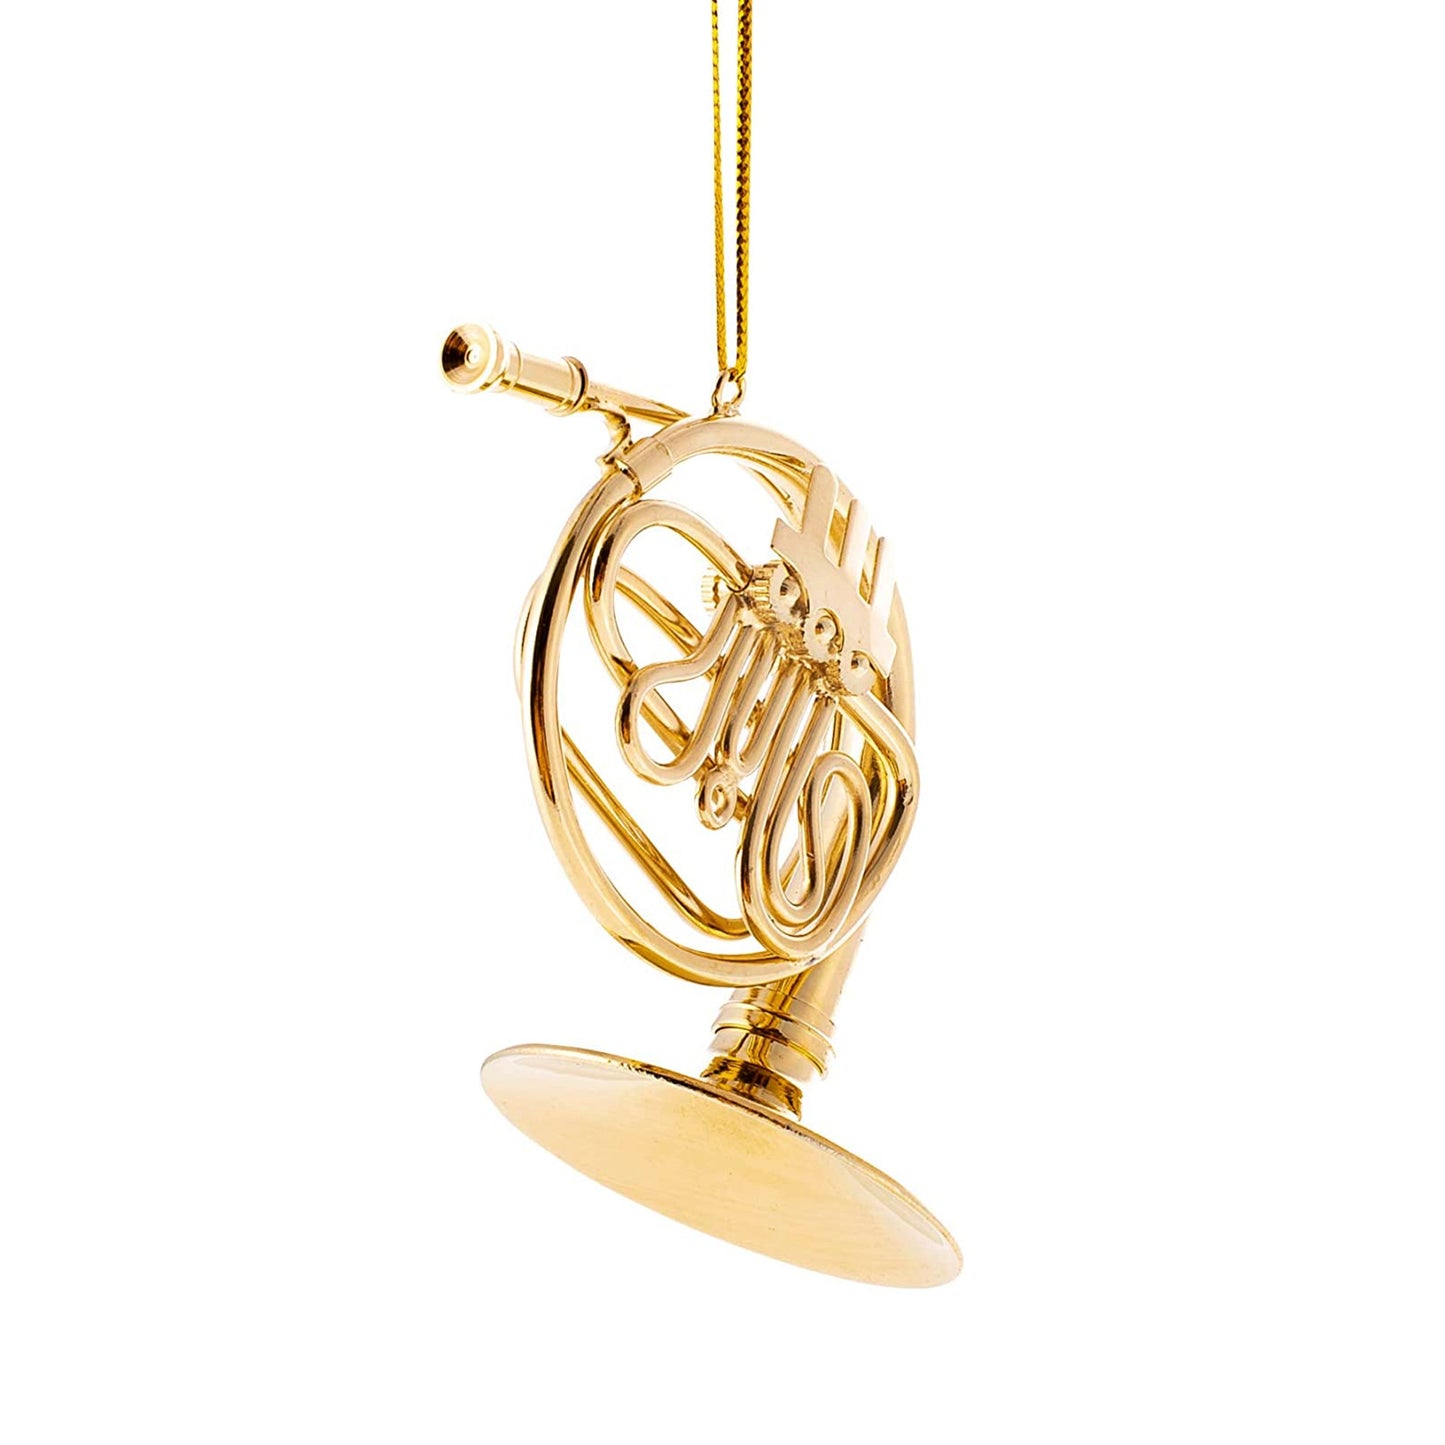 French Horn Ornament